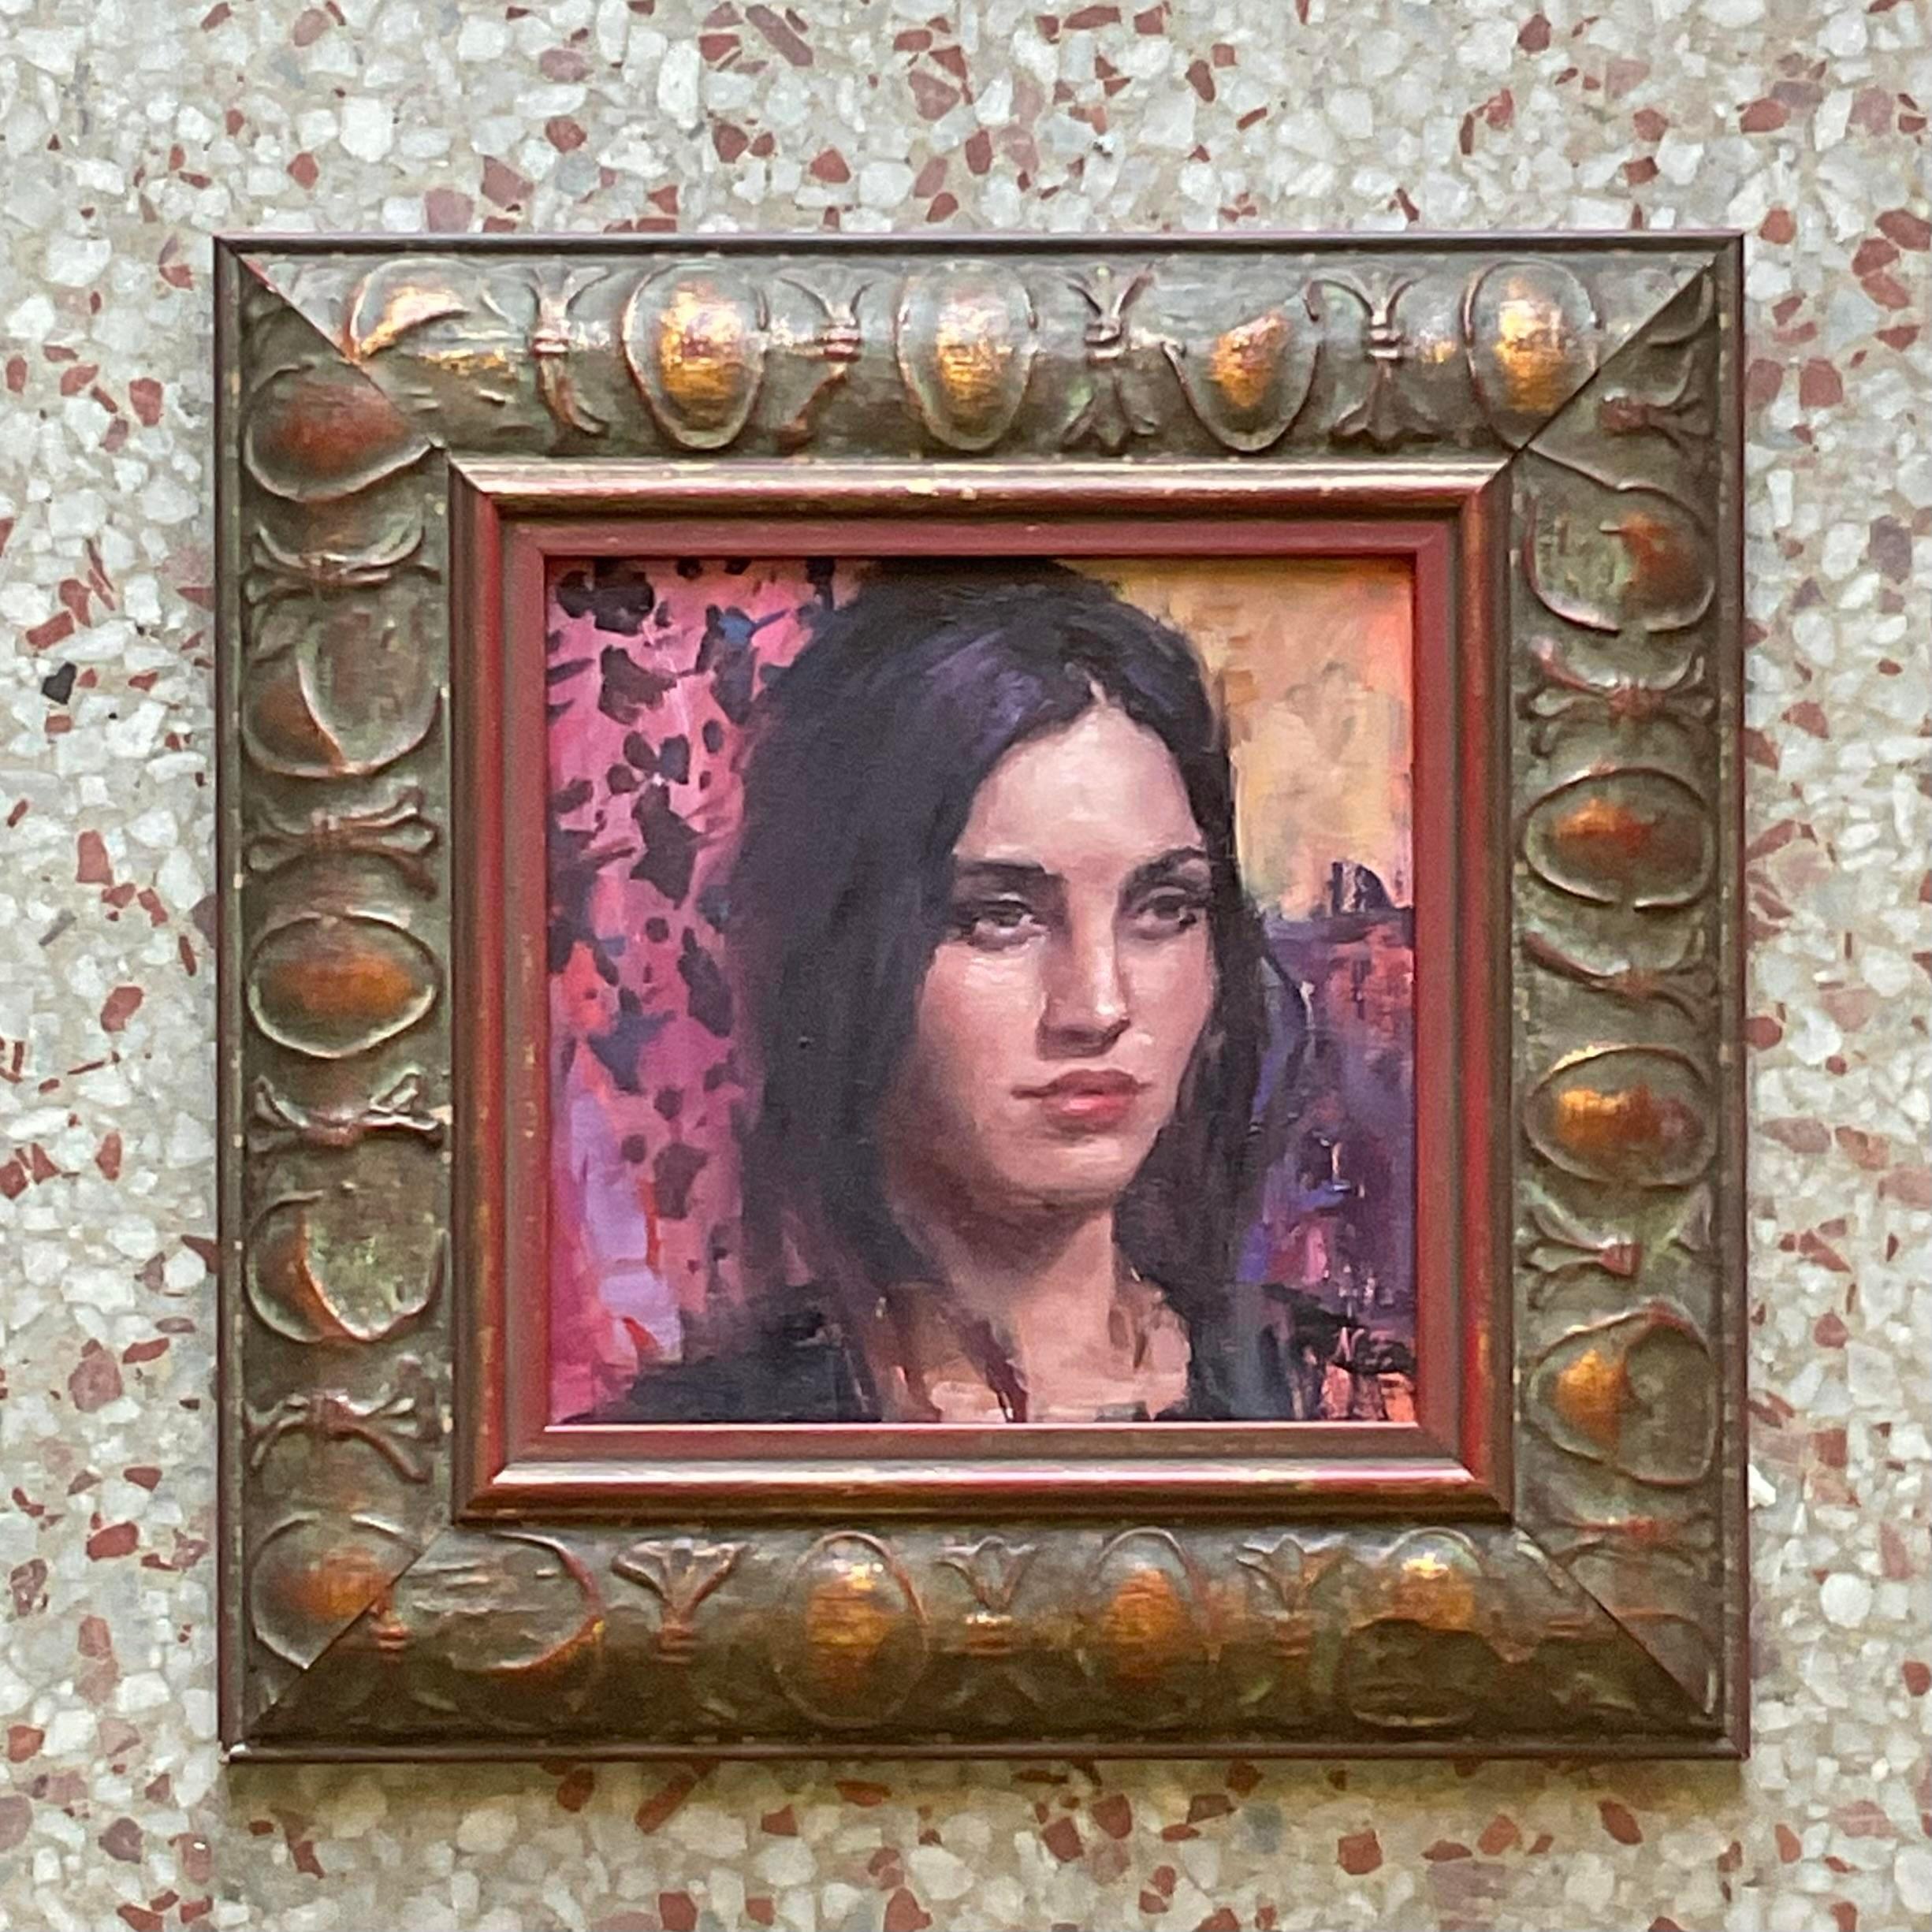 A fantastic vintage Boho original oil painting on board. A chic little portrait in brilliant bright colors. Done by the LA artist Natalia Fabia. Acquired from a Palm Beach estate. 